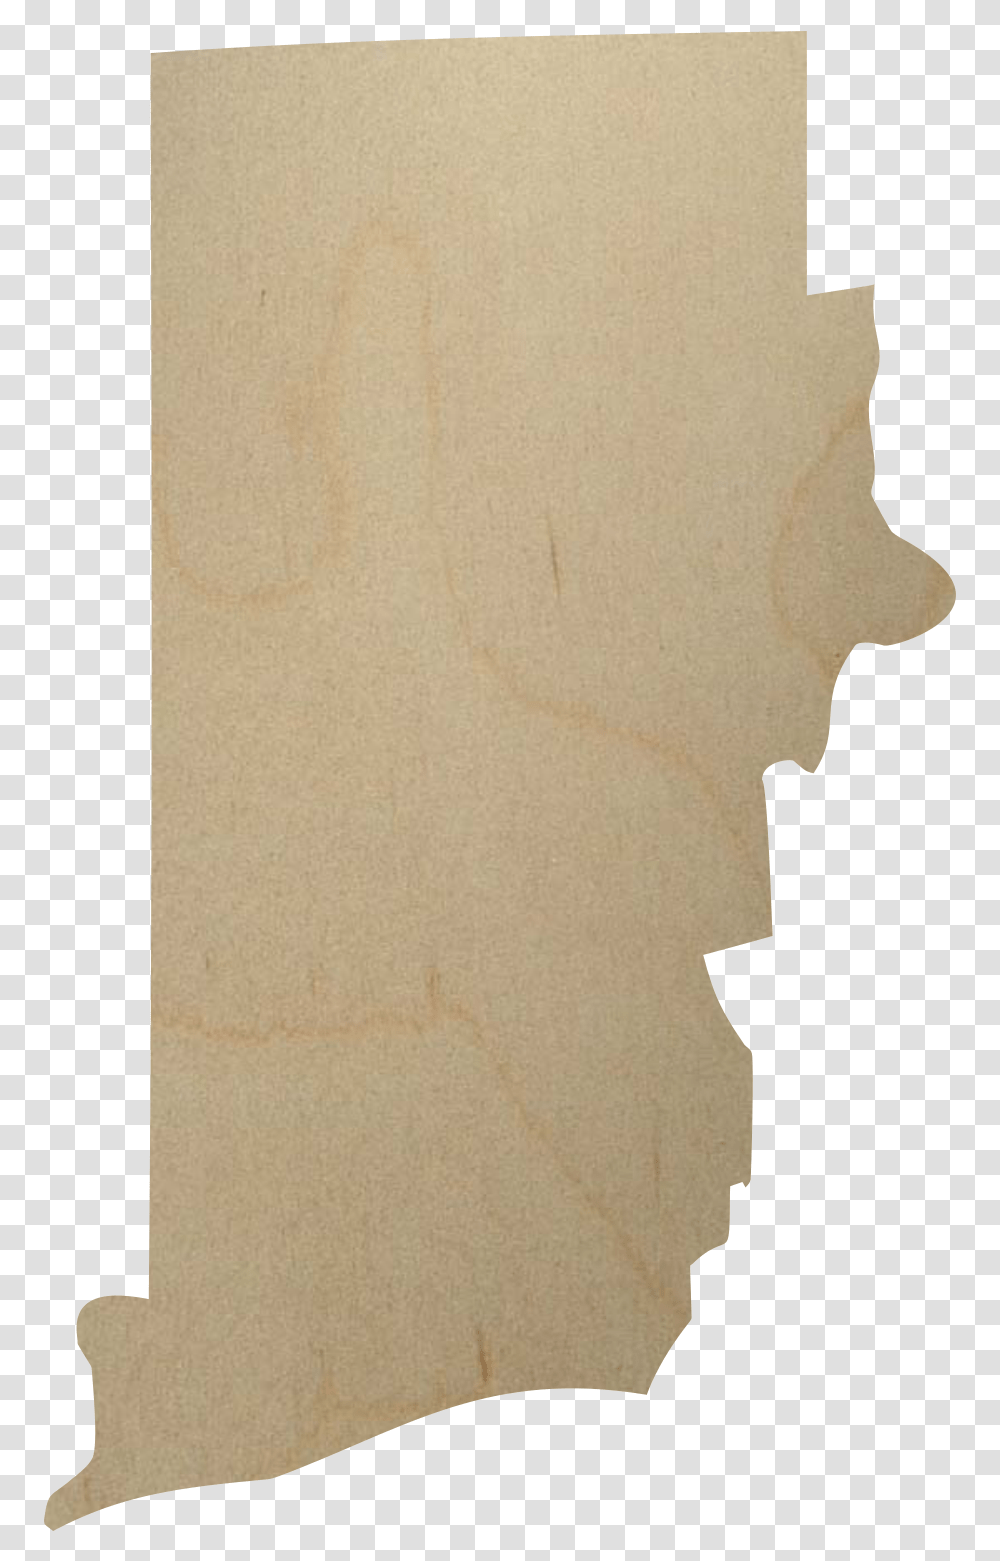 Rhode Island Wood Cutout Rhode Island State Cut Out, Rug, Face, Paper Transparent Png